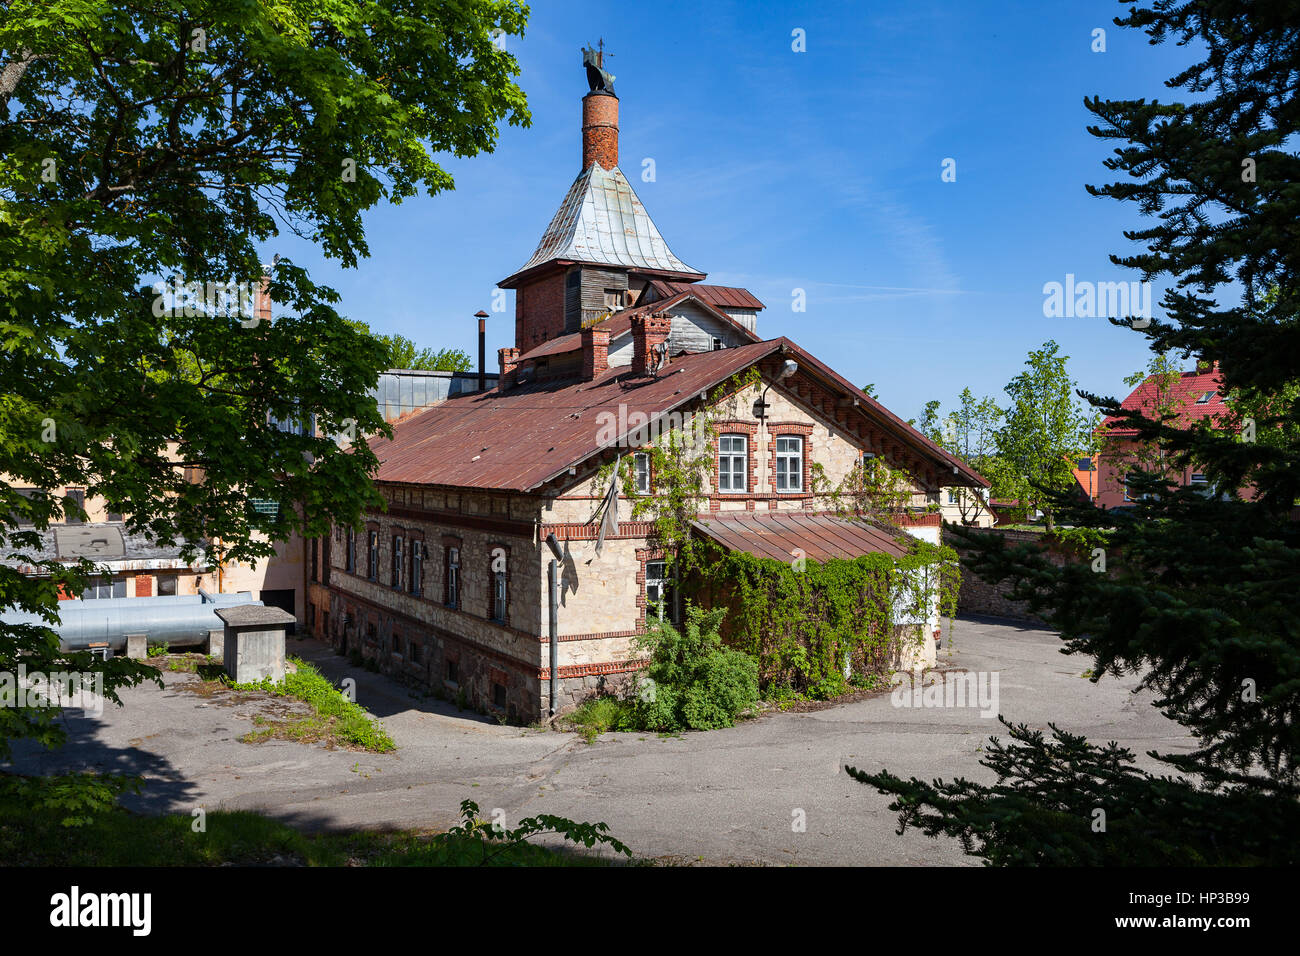 Abandoned brewery building in Cesis, Latvia. Stock Photo